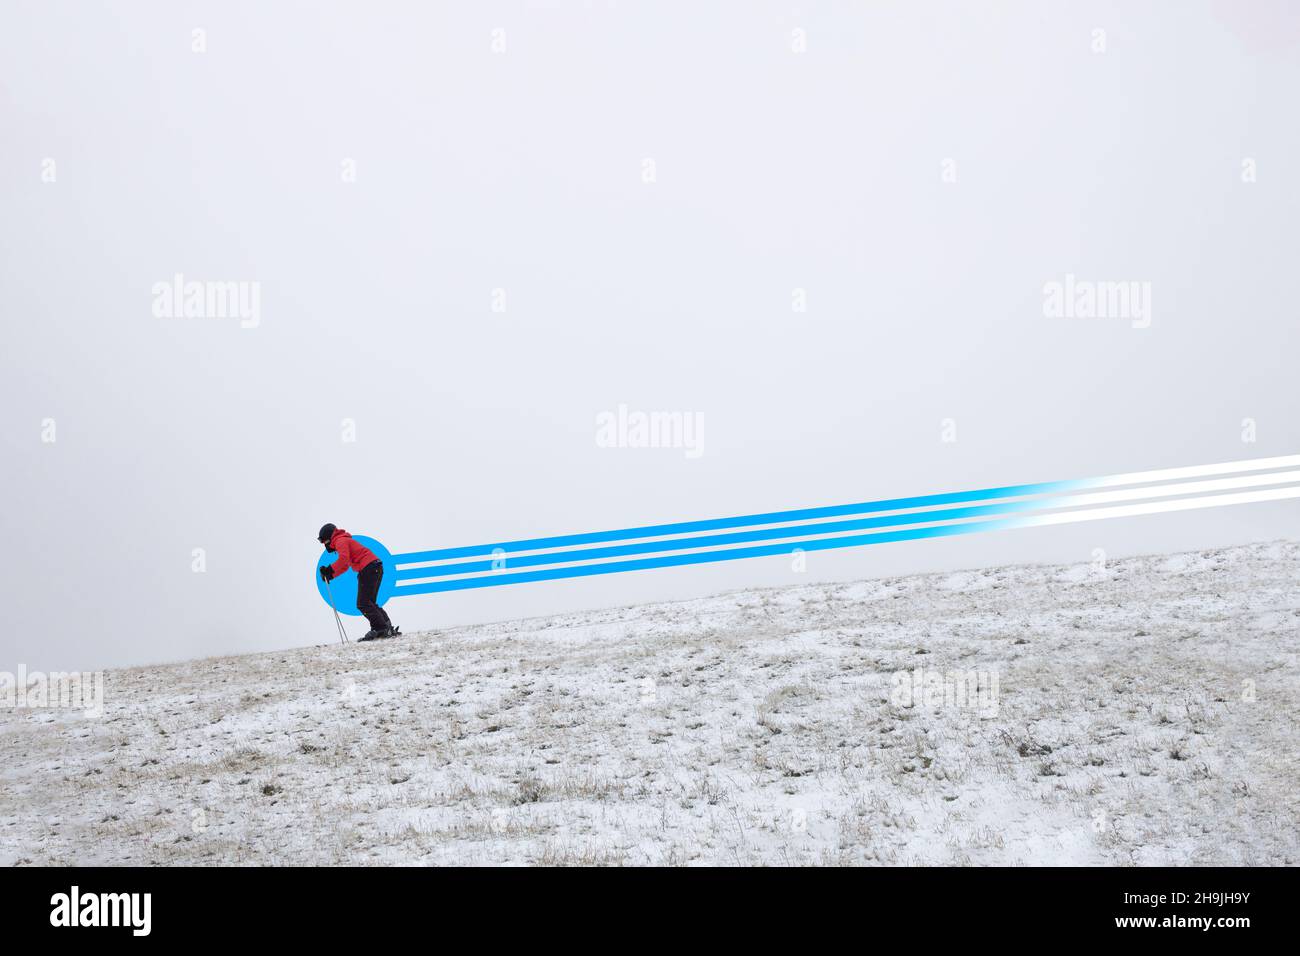 Skiing downhill during the winter Stock Photo